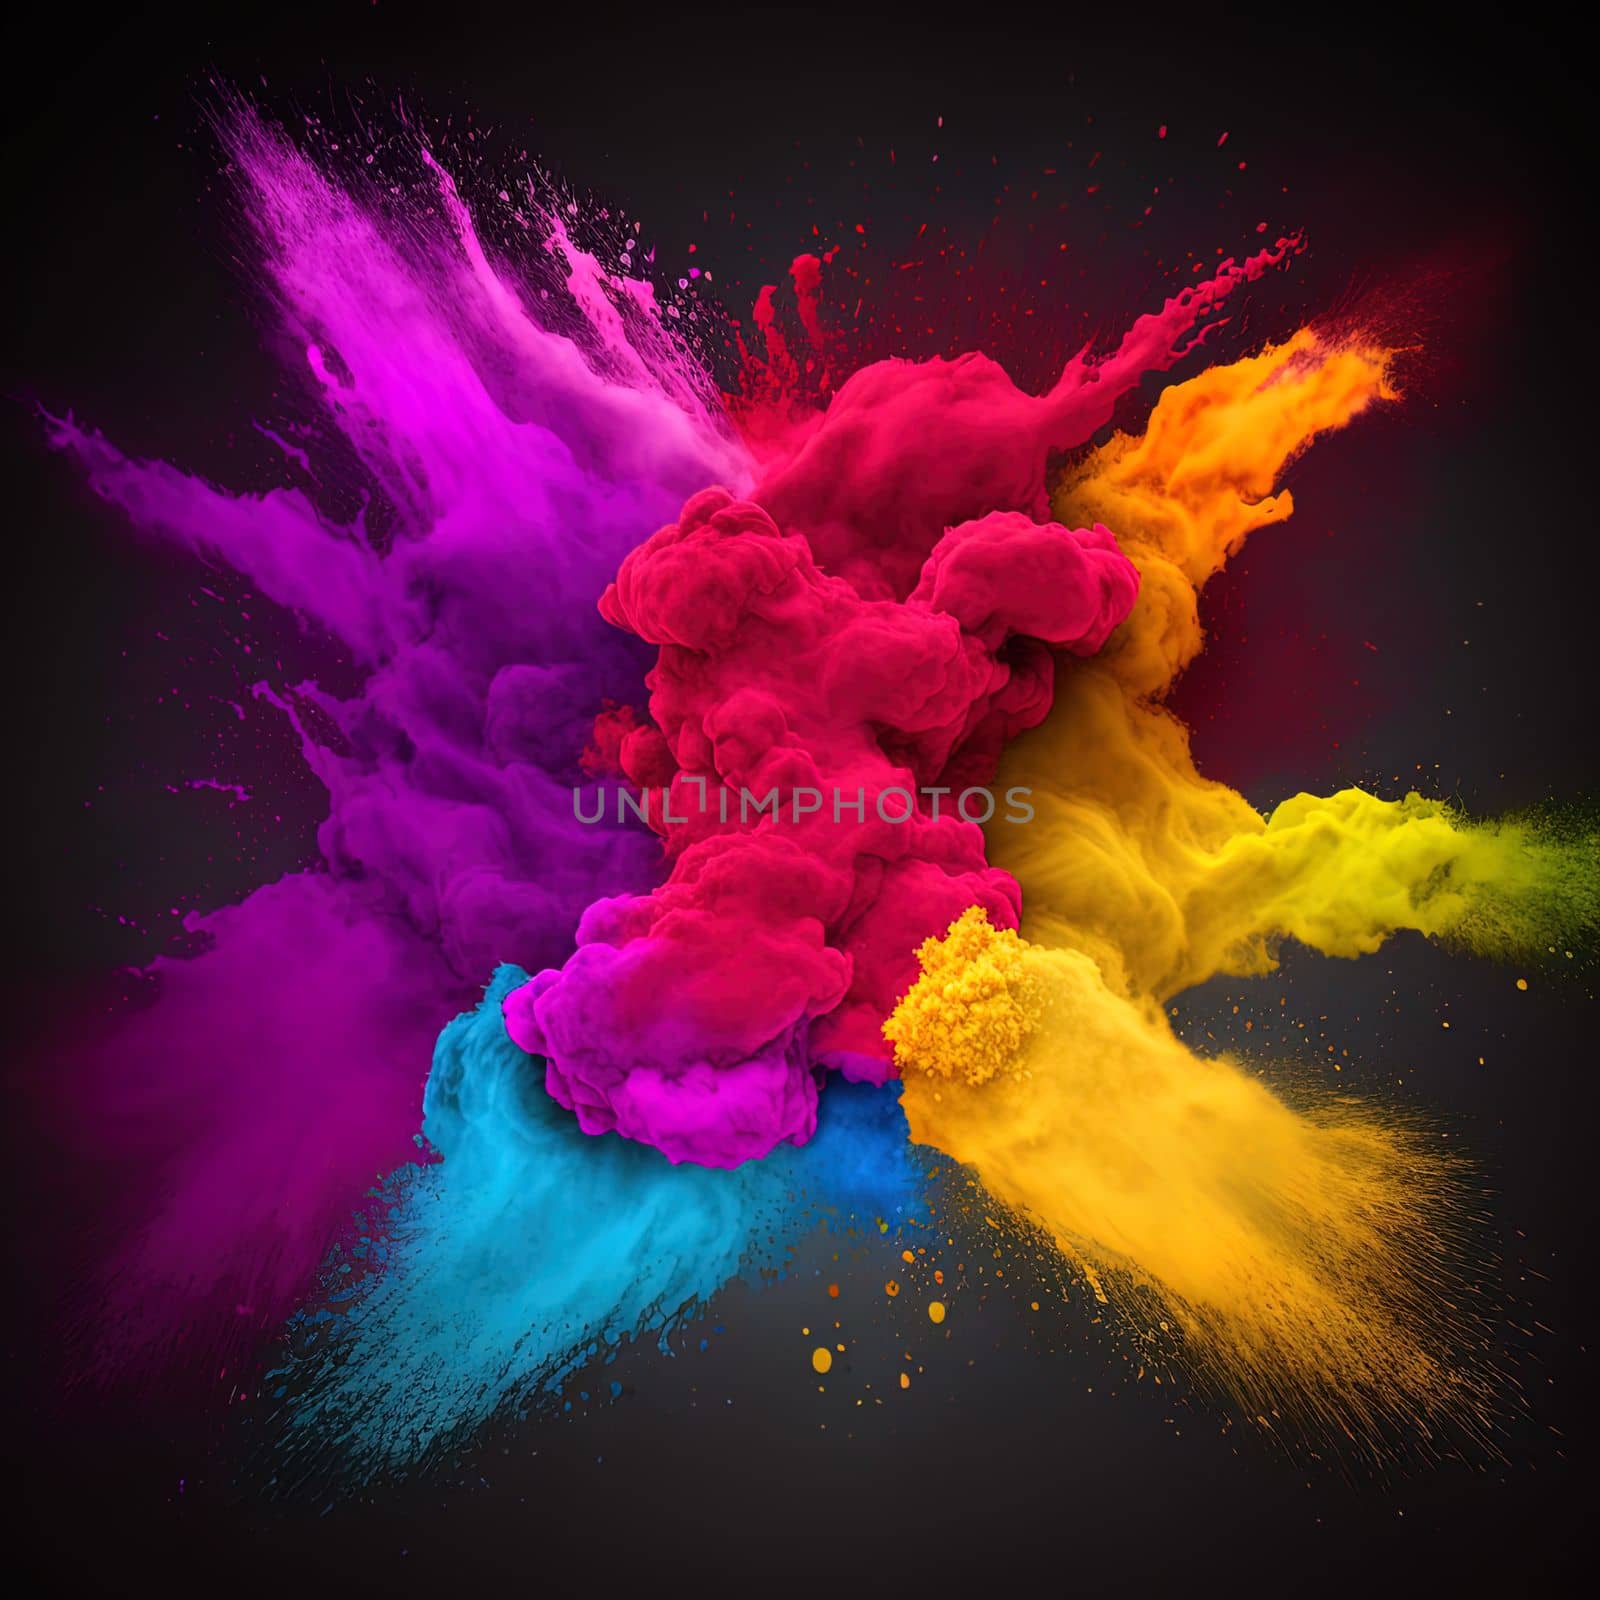 Splashes of paint on the Holi holiday by Dustick